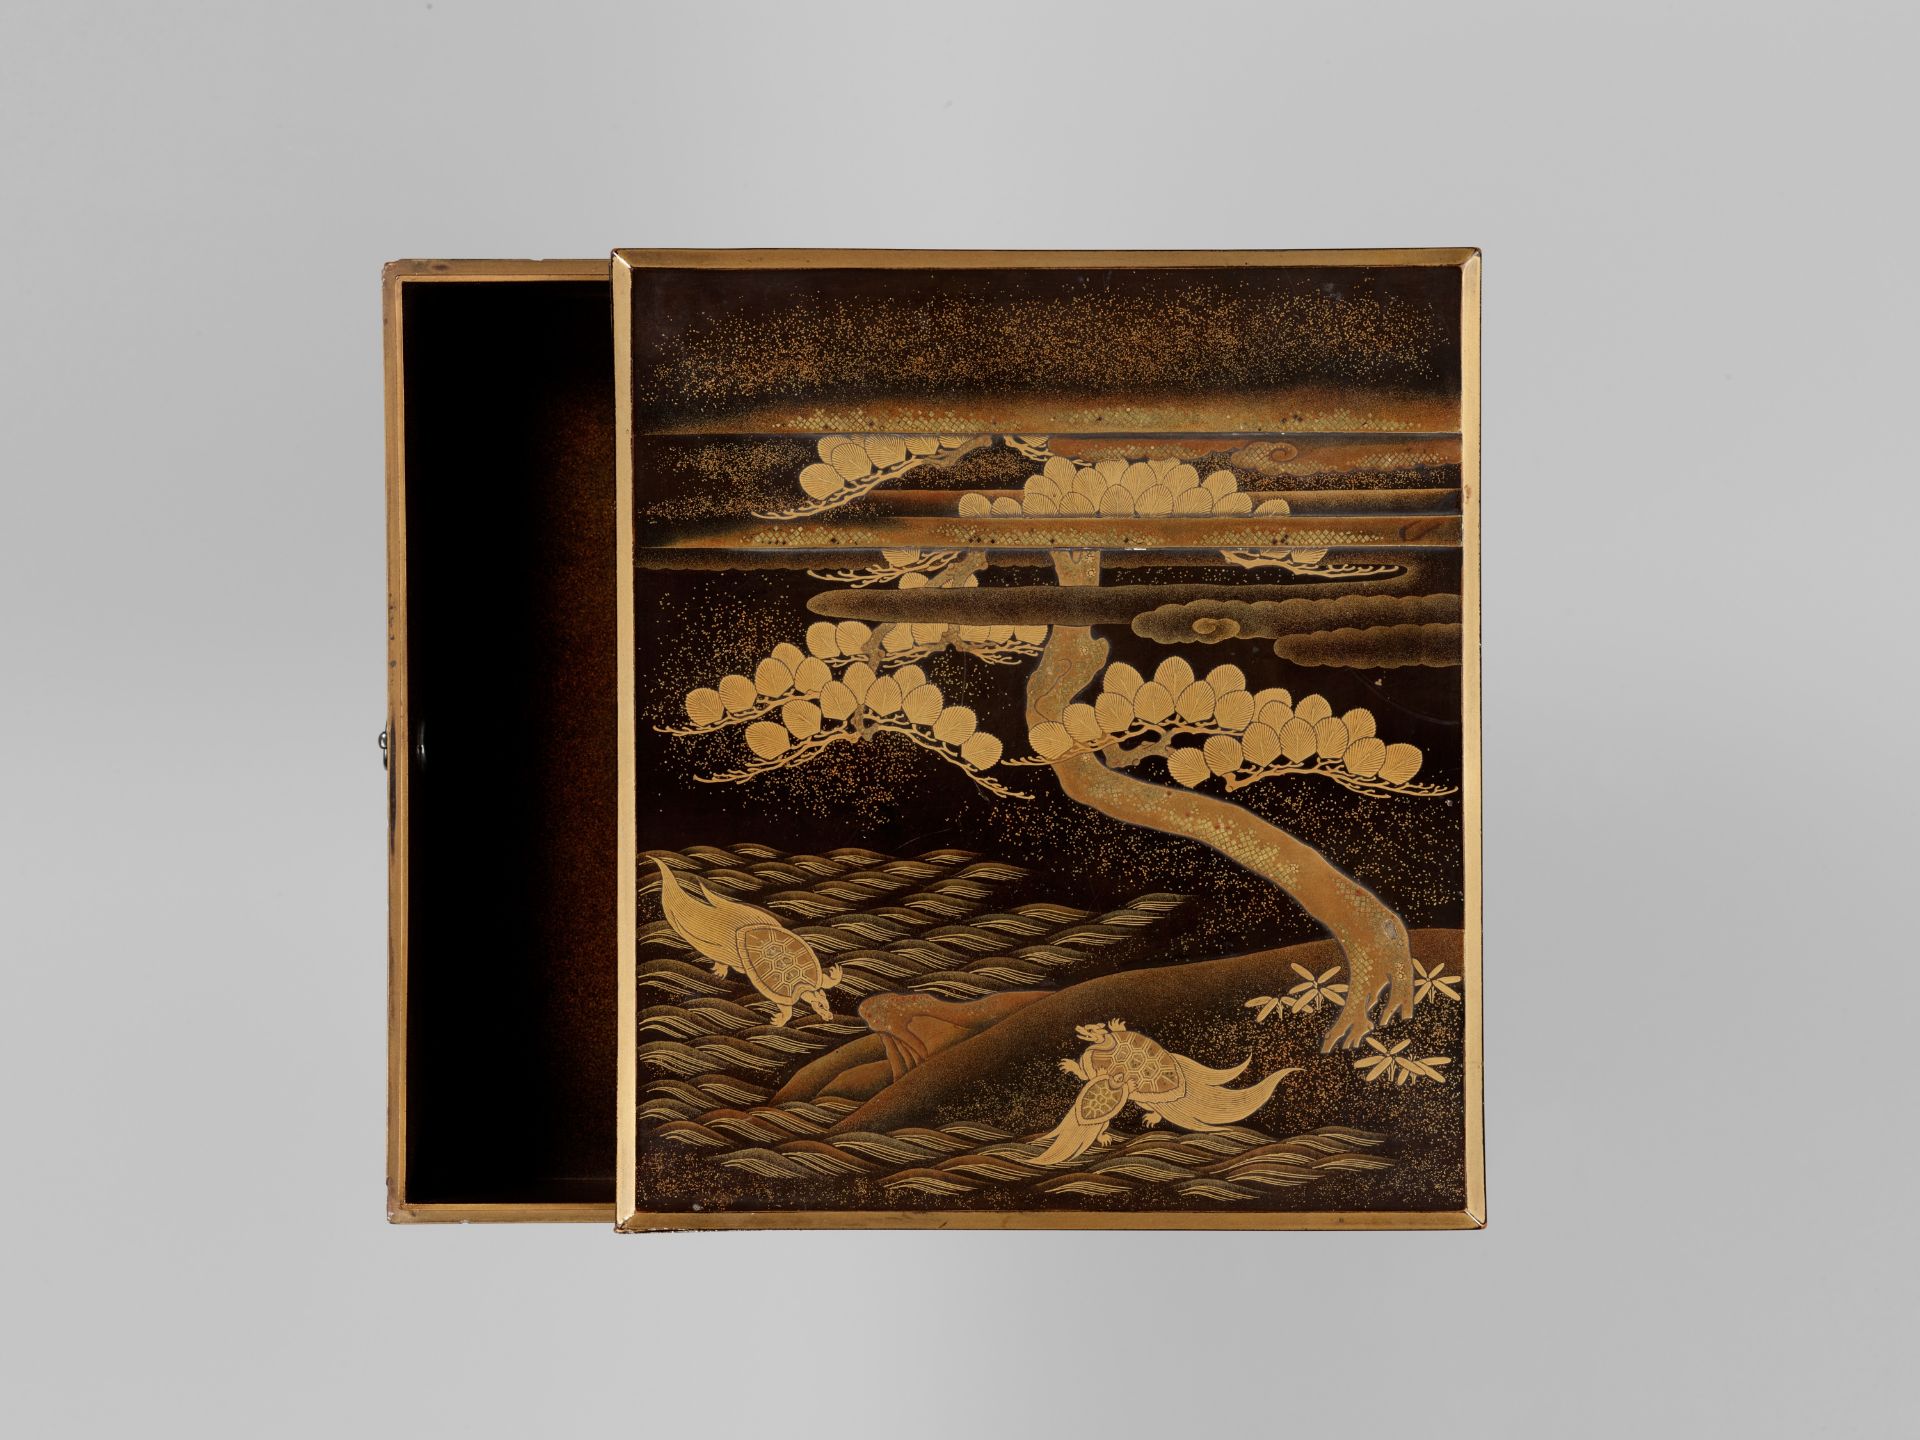 A LACQUER BOX AND COVER WITH MINOGAME DESIGN - Image 5 of 10